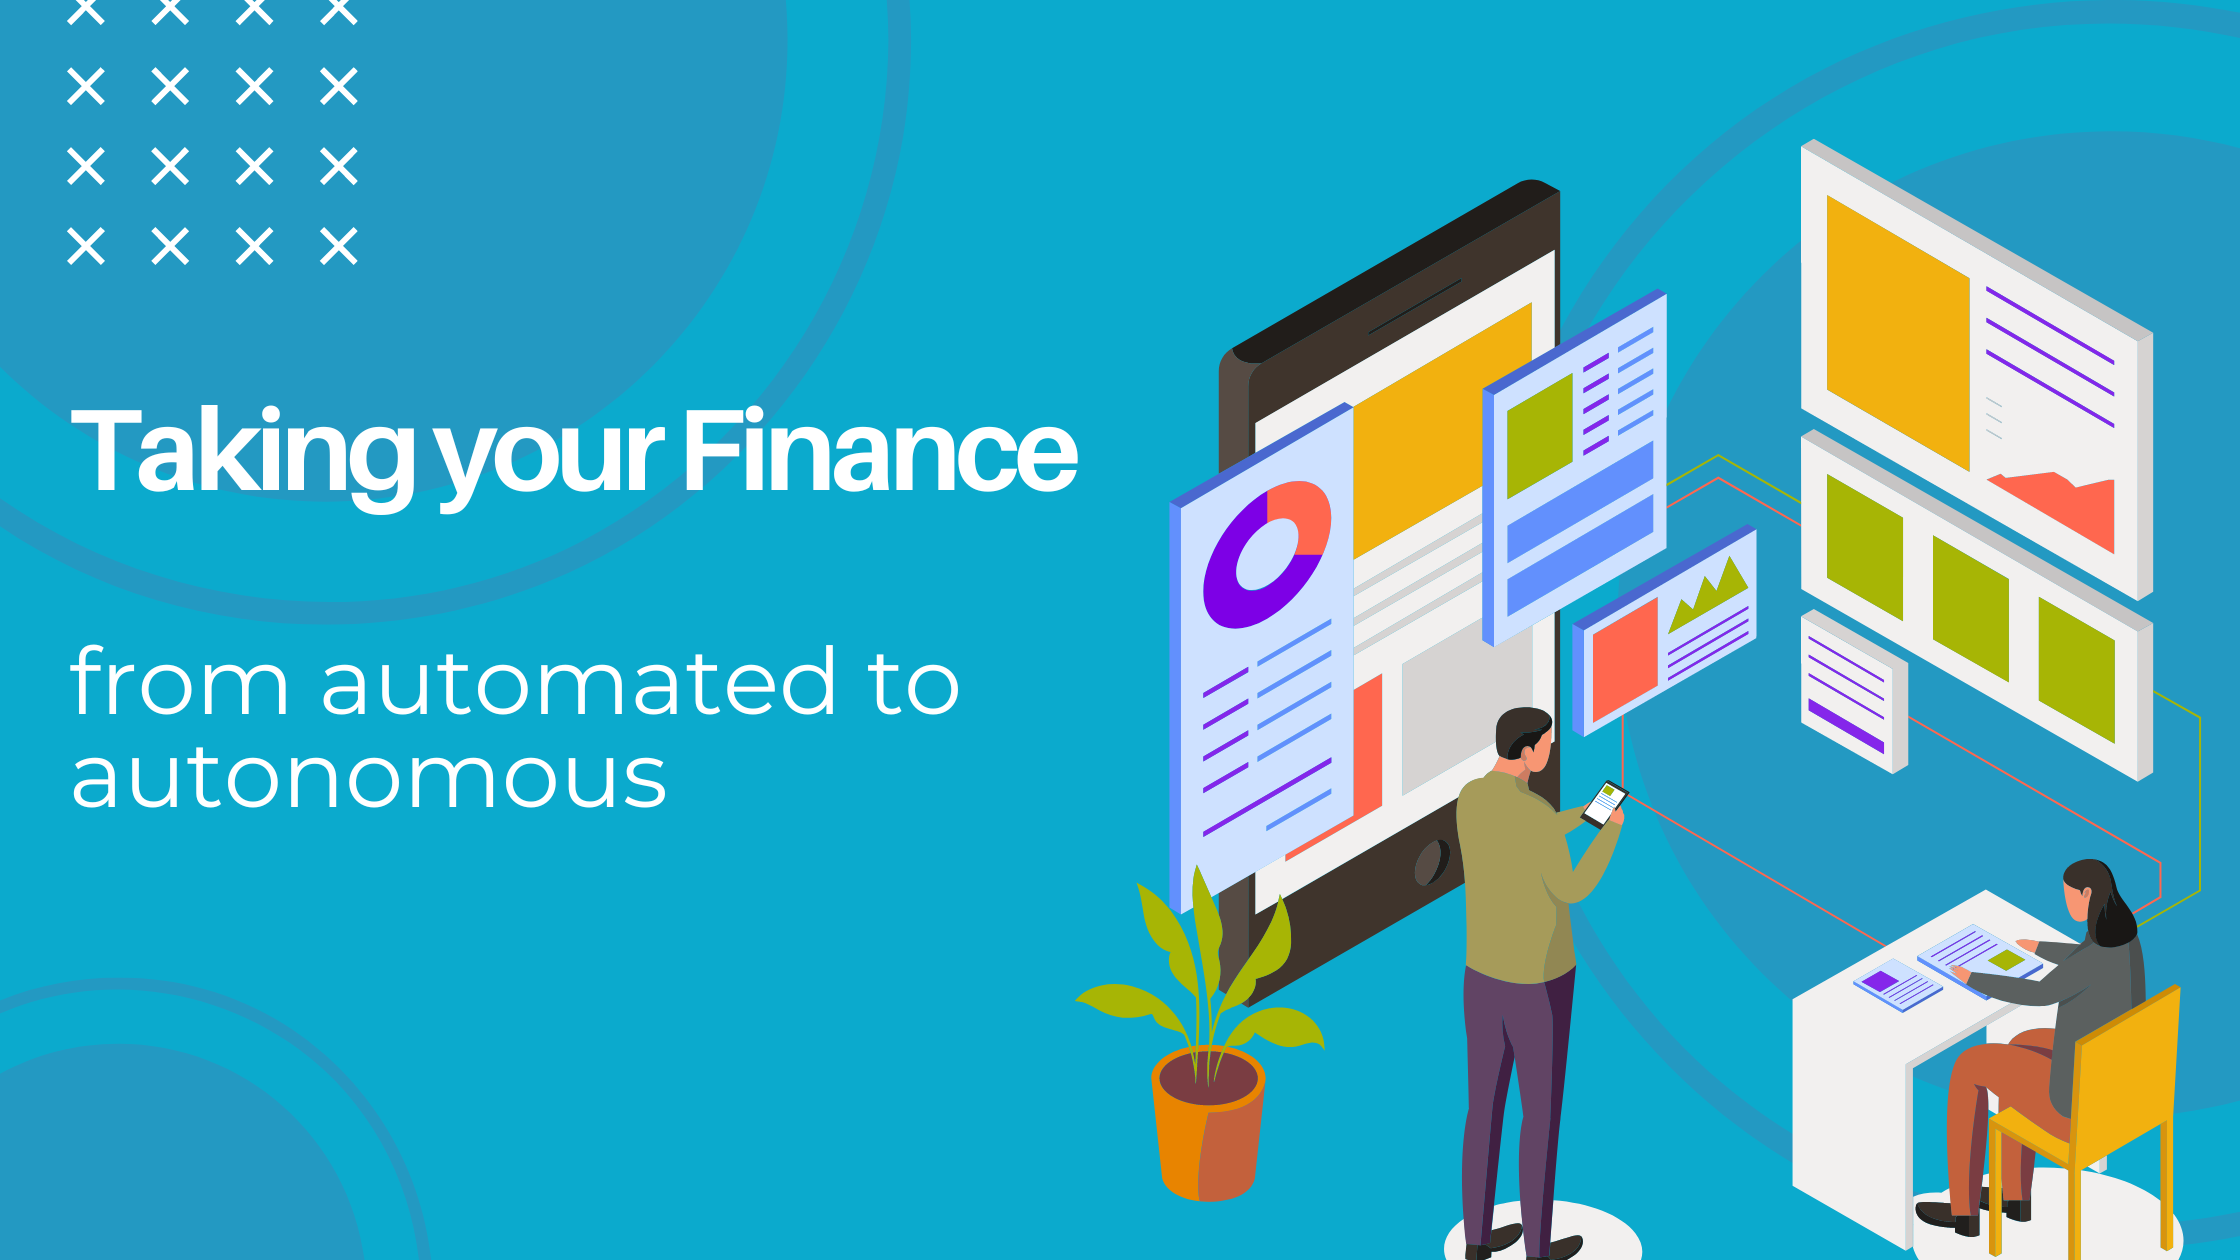 Taking your Finance from automated to autonomous